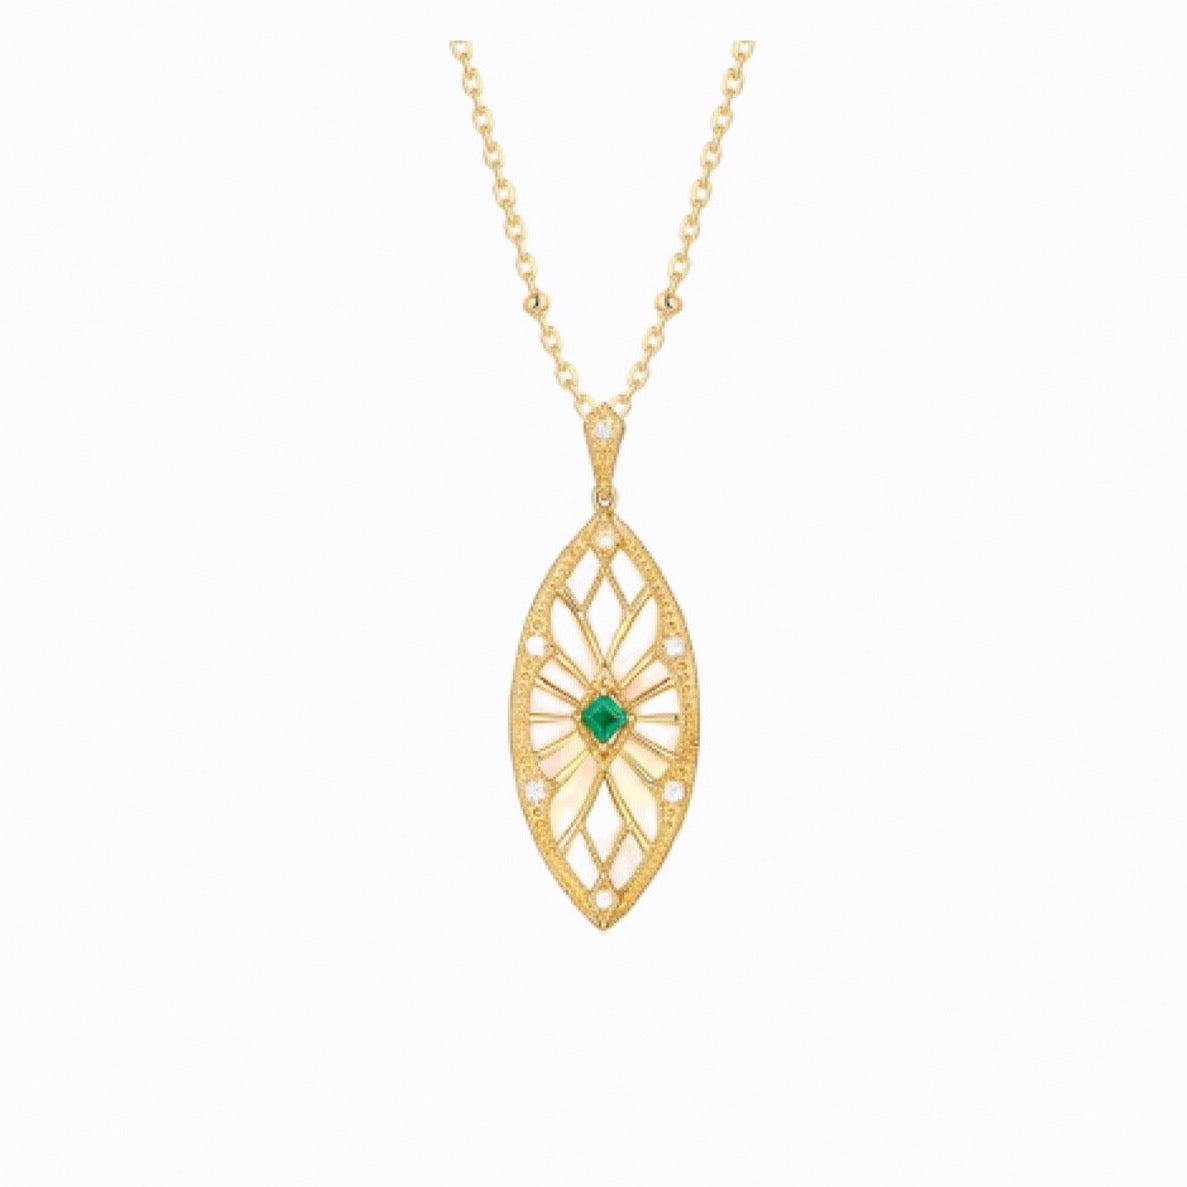 Emerald Eye Pendant Necklace, 14ct Gold Plate